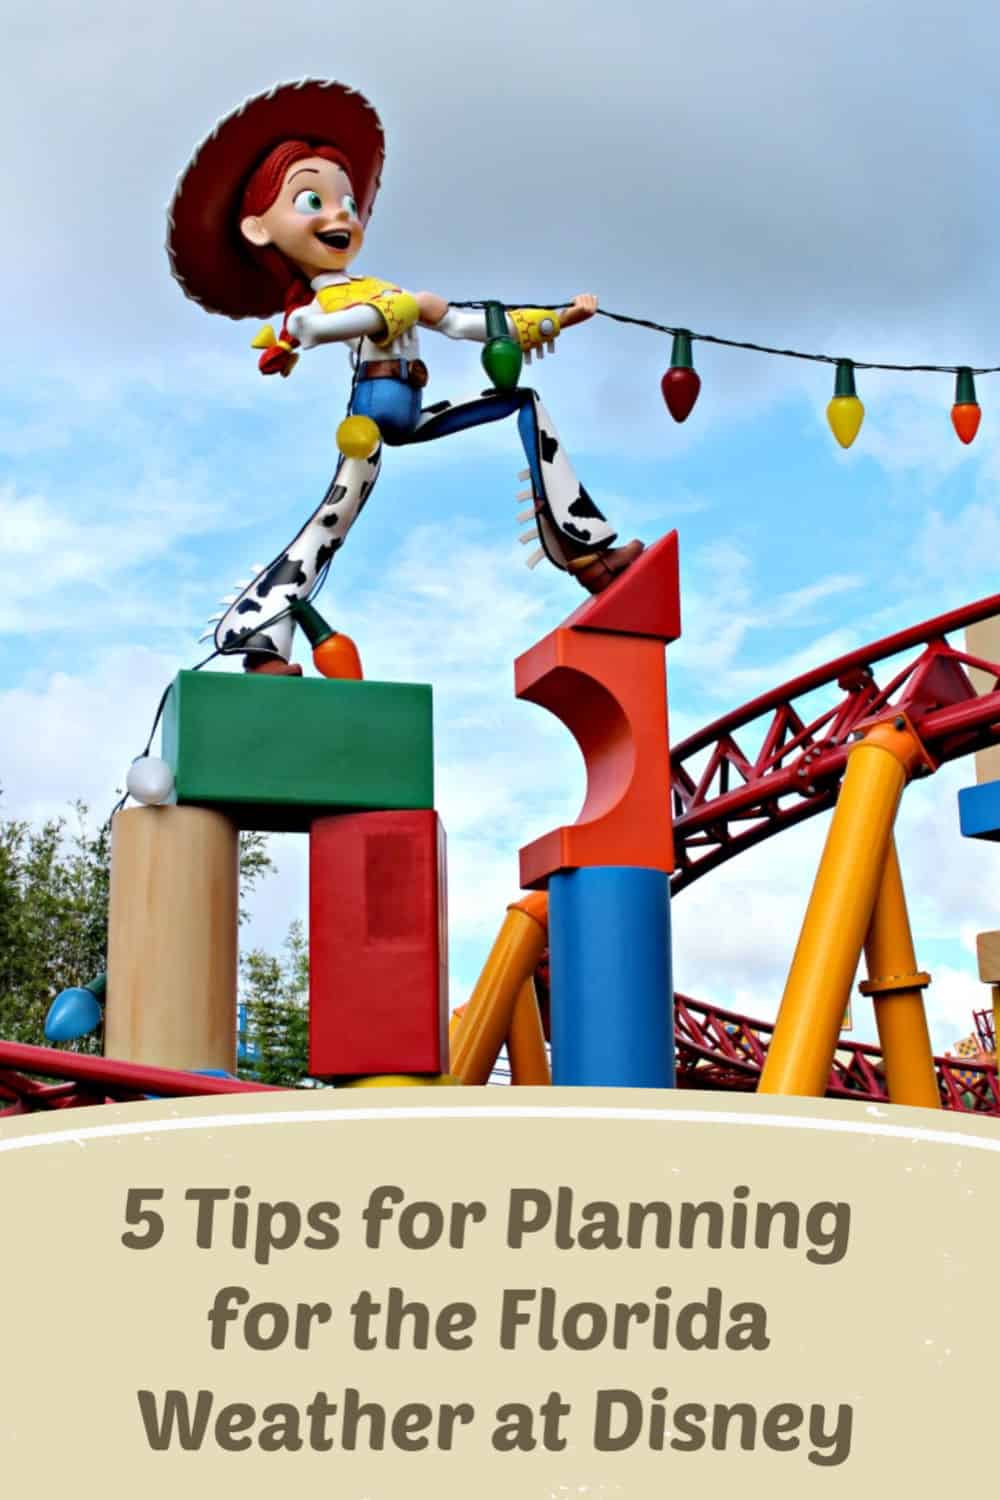 5 Tips for Planning for the Florida Weather at Disney - Florida weather doesn't have to ruin your Disney day. Find out how to plan for the weather.